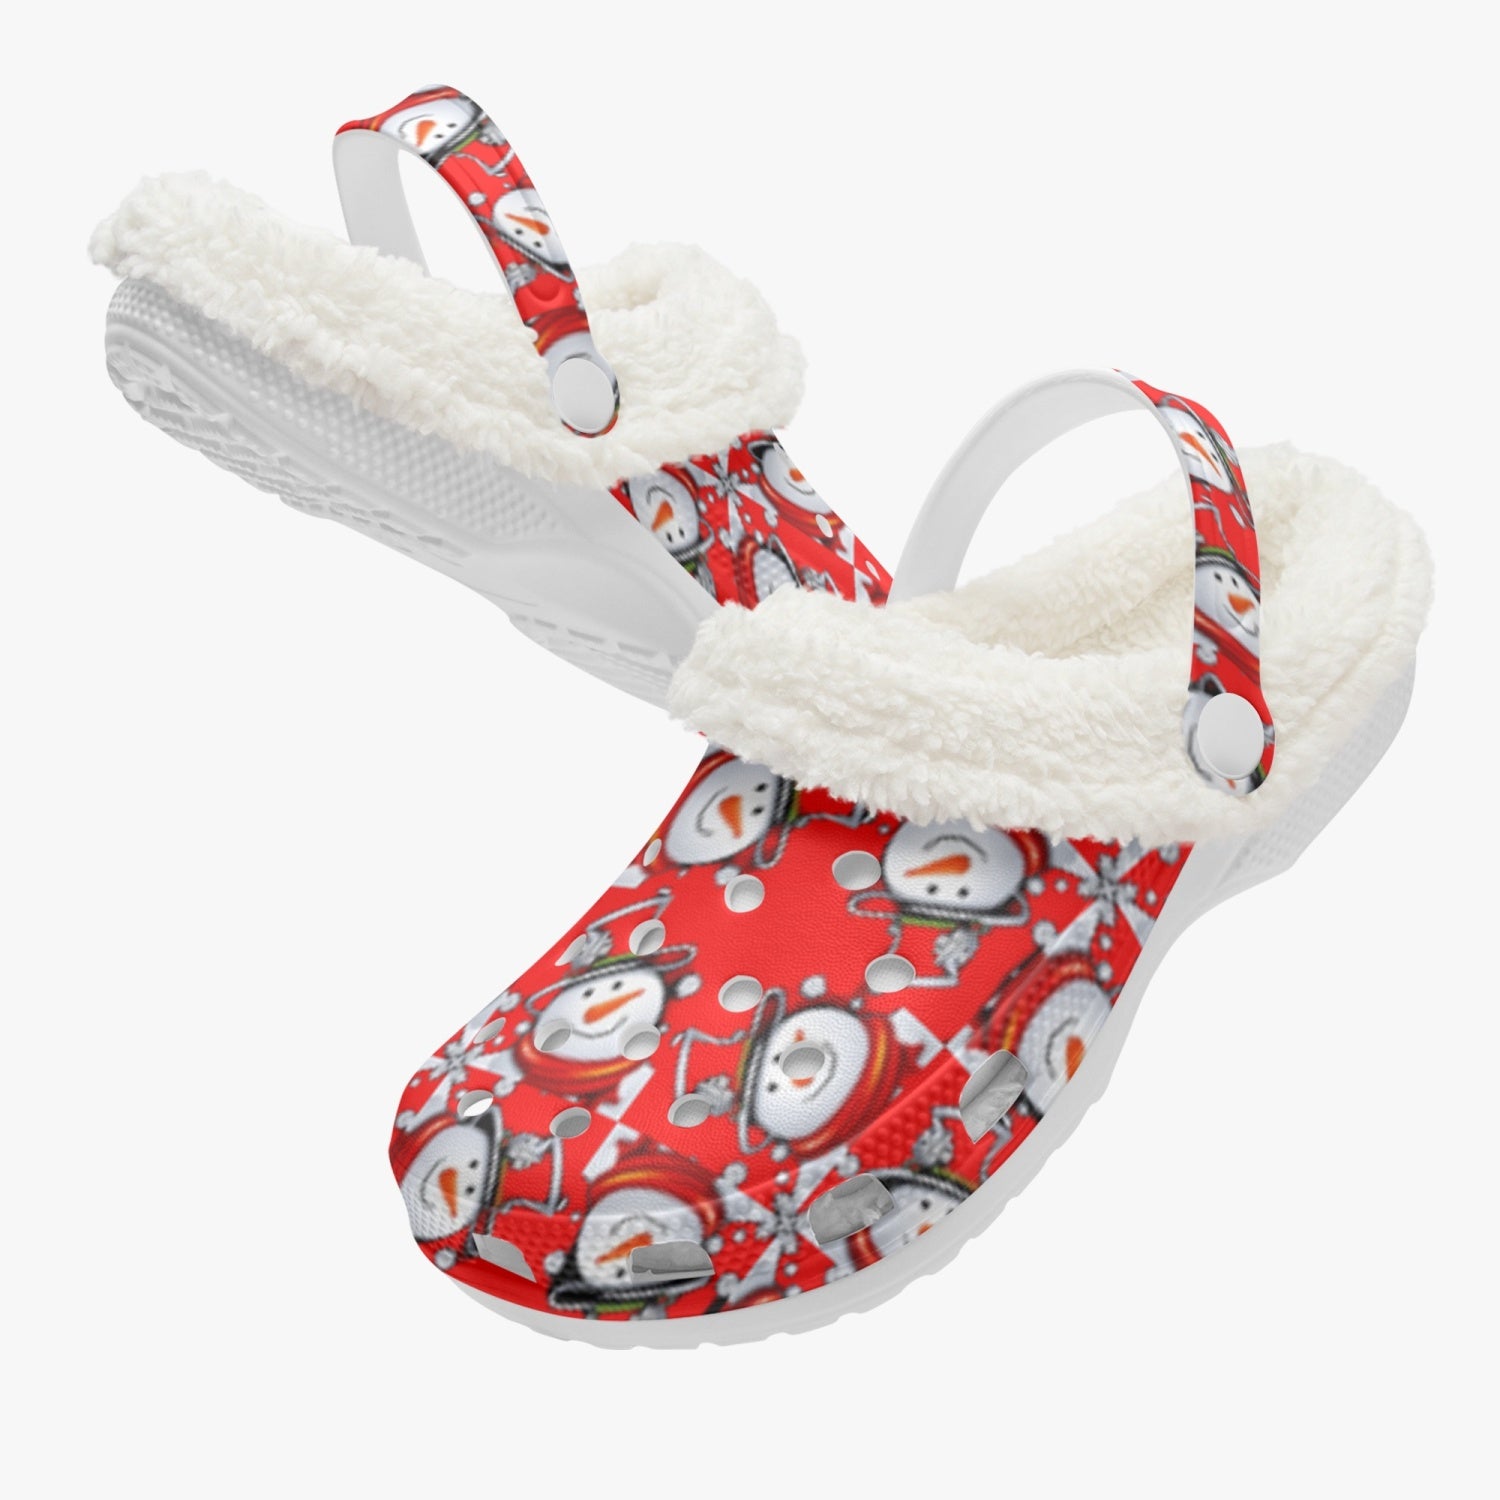 Snow Man's Delight Fuzzy Lined Christmas Clogs - 2 colors - women's clogs at TFC&H Co.